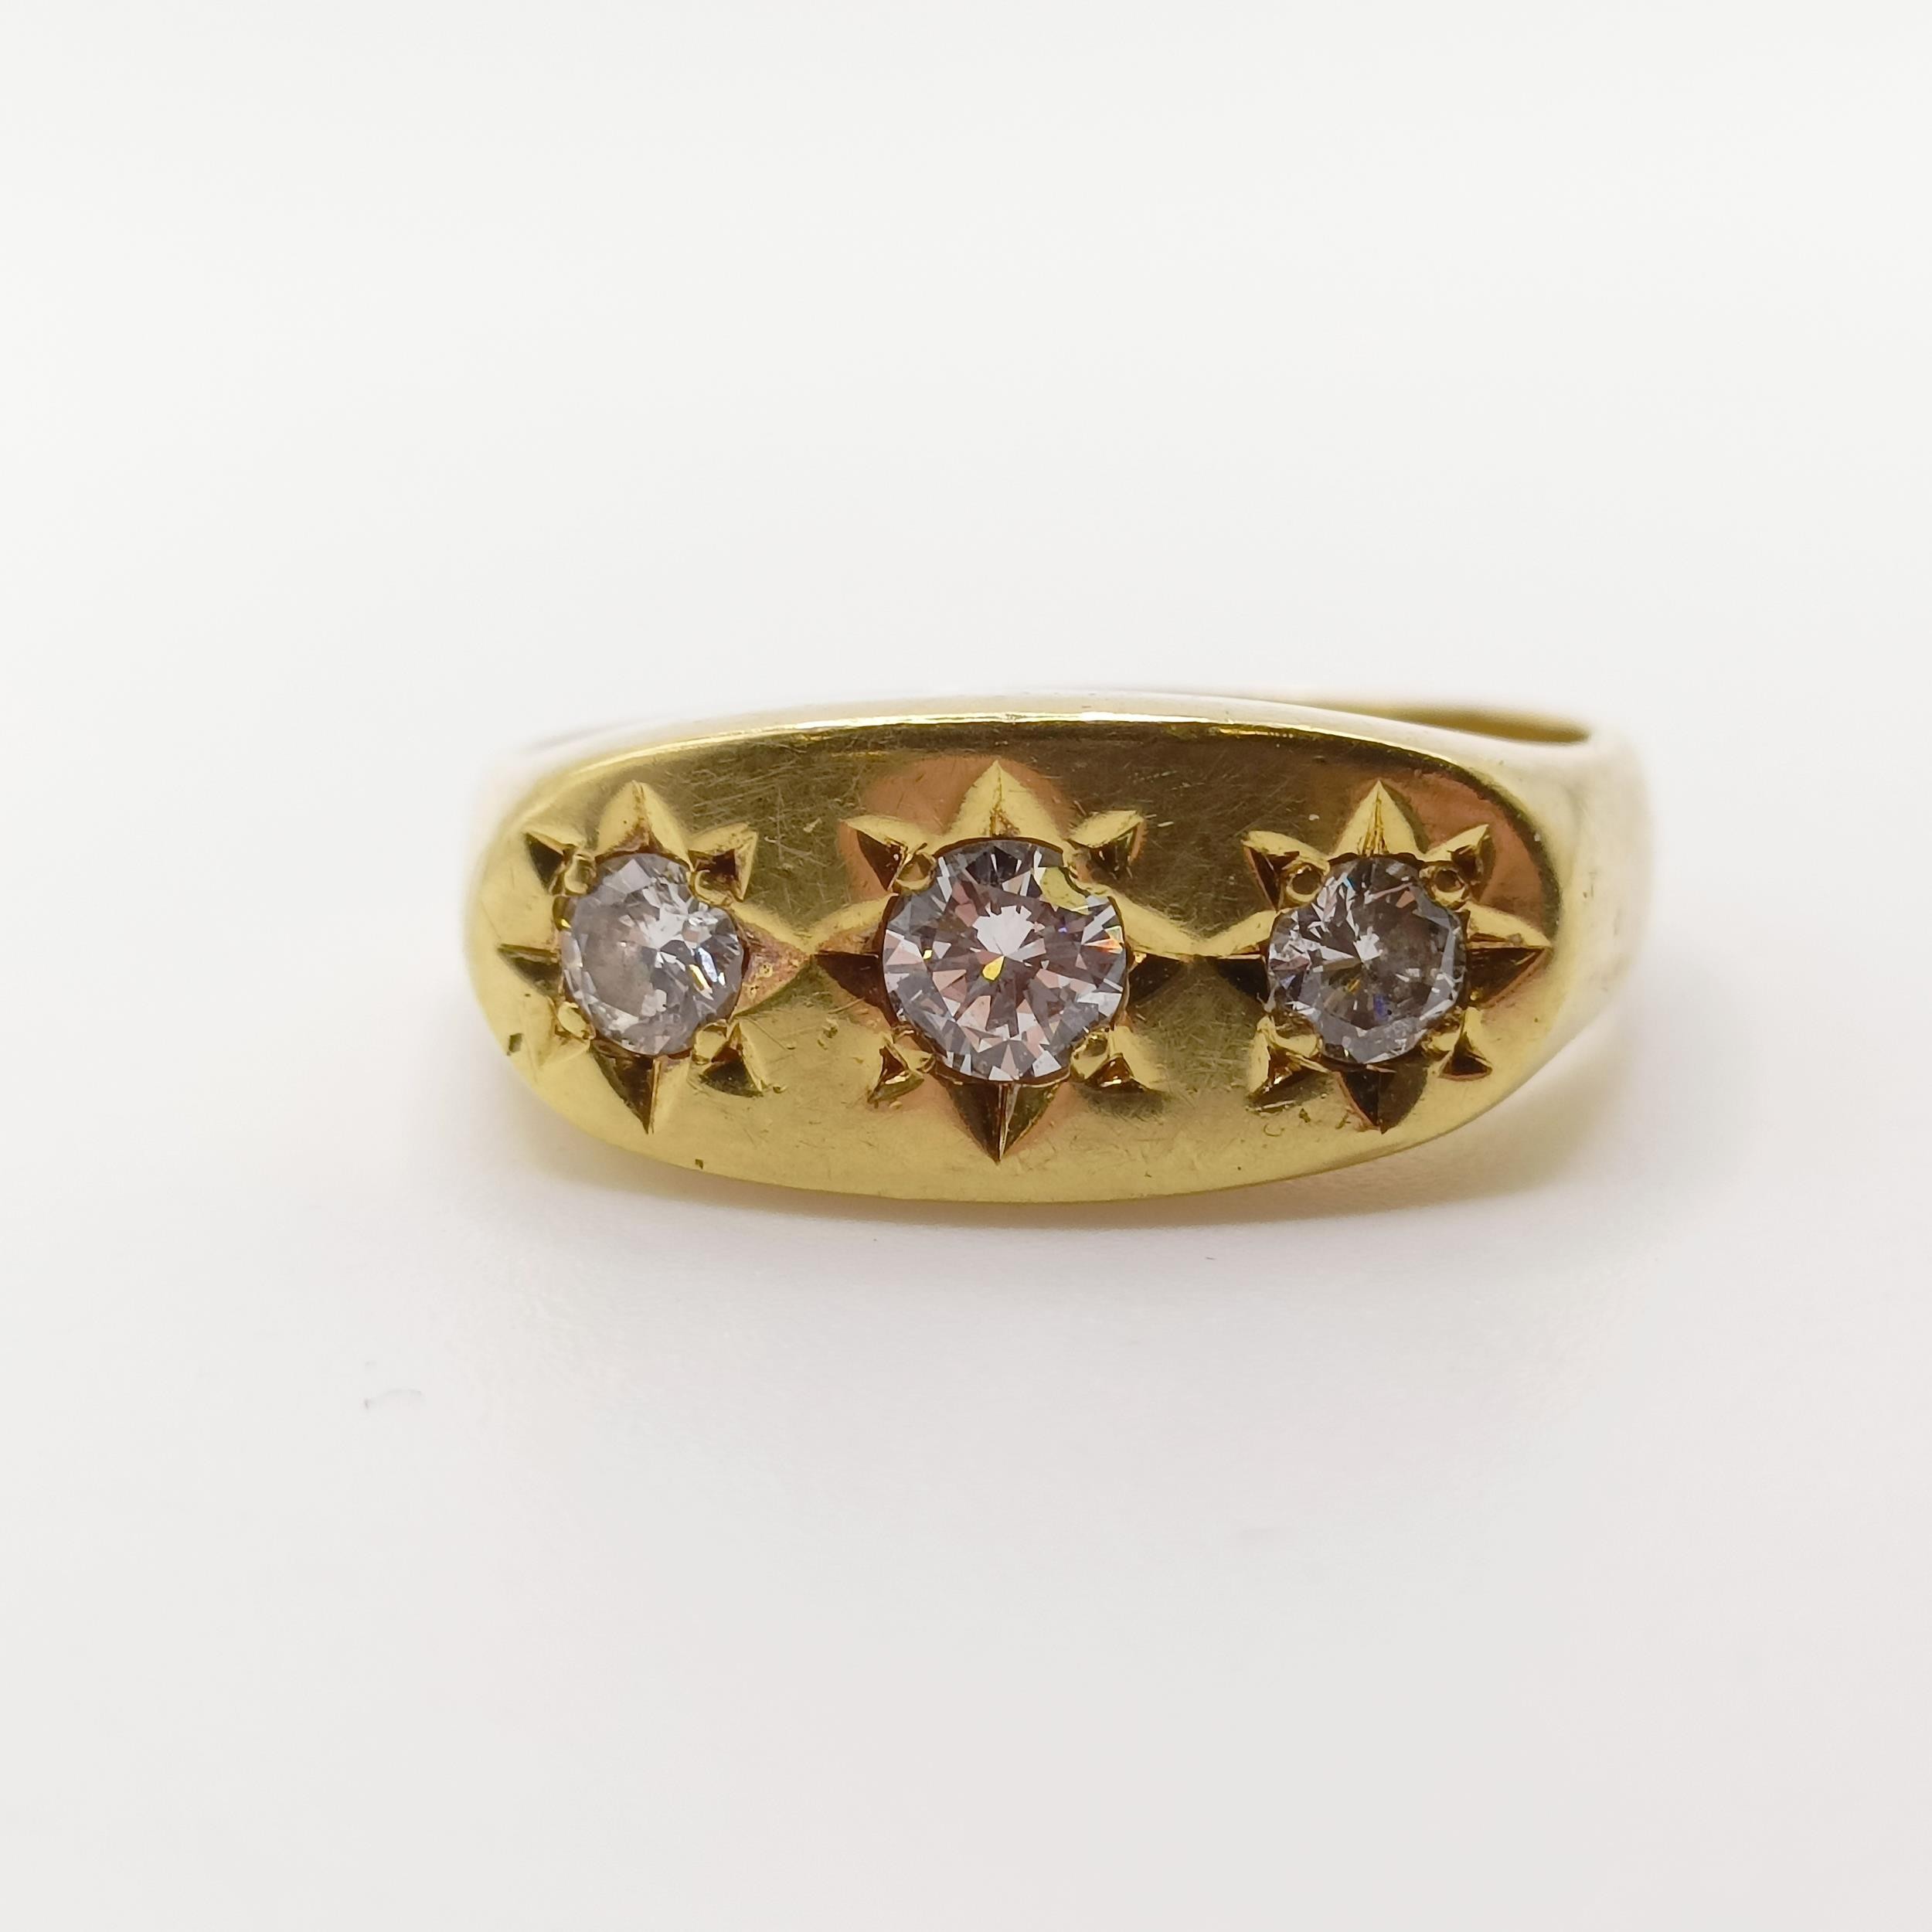 An 18ct gold three stone diamond gypsy set ring, ring size P 1/2 light ware due to use, no obvious - Image 2 of 5